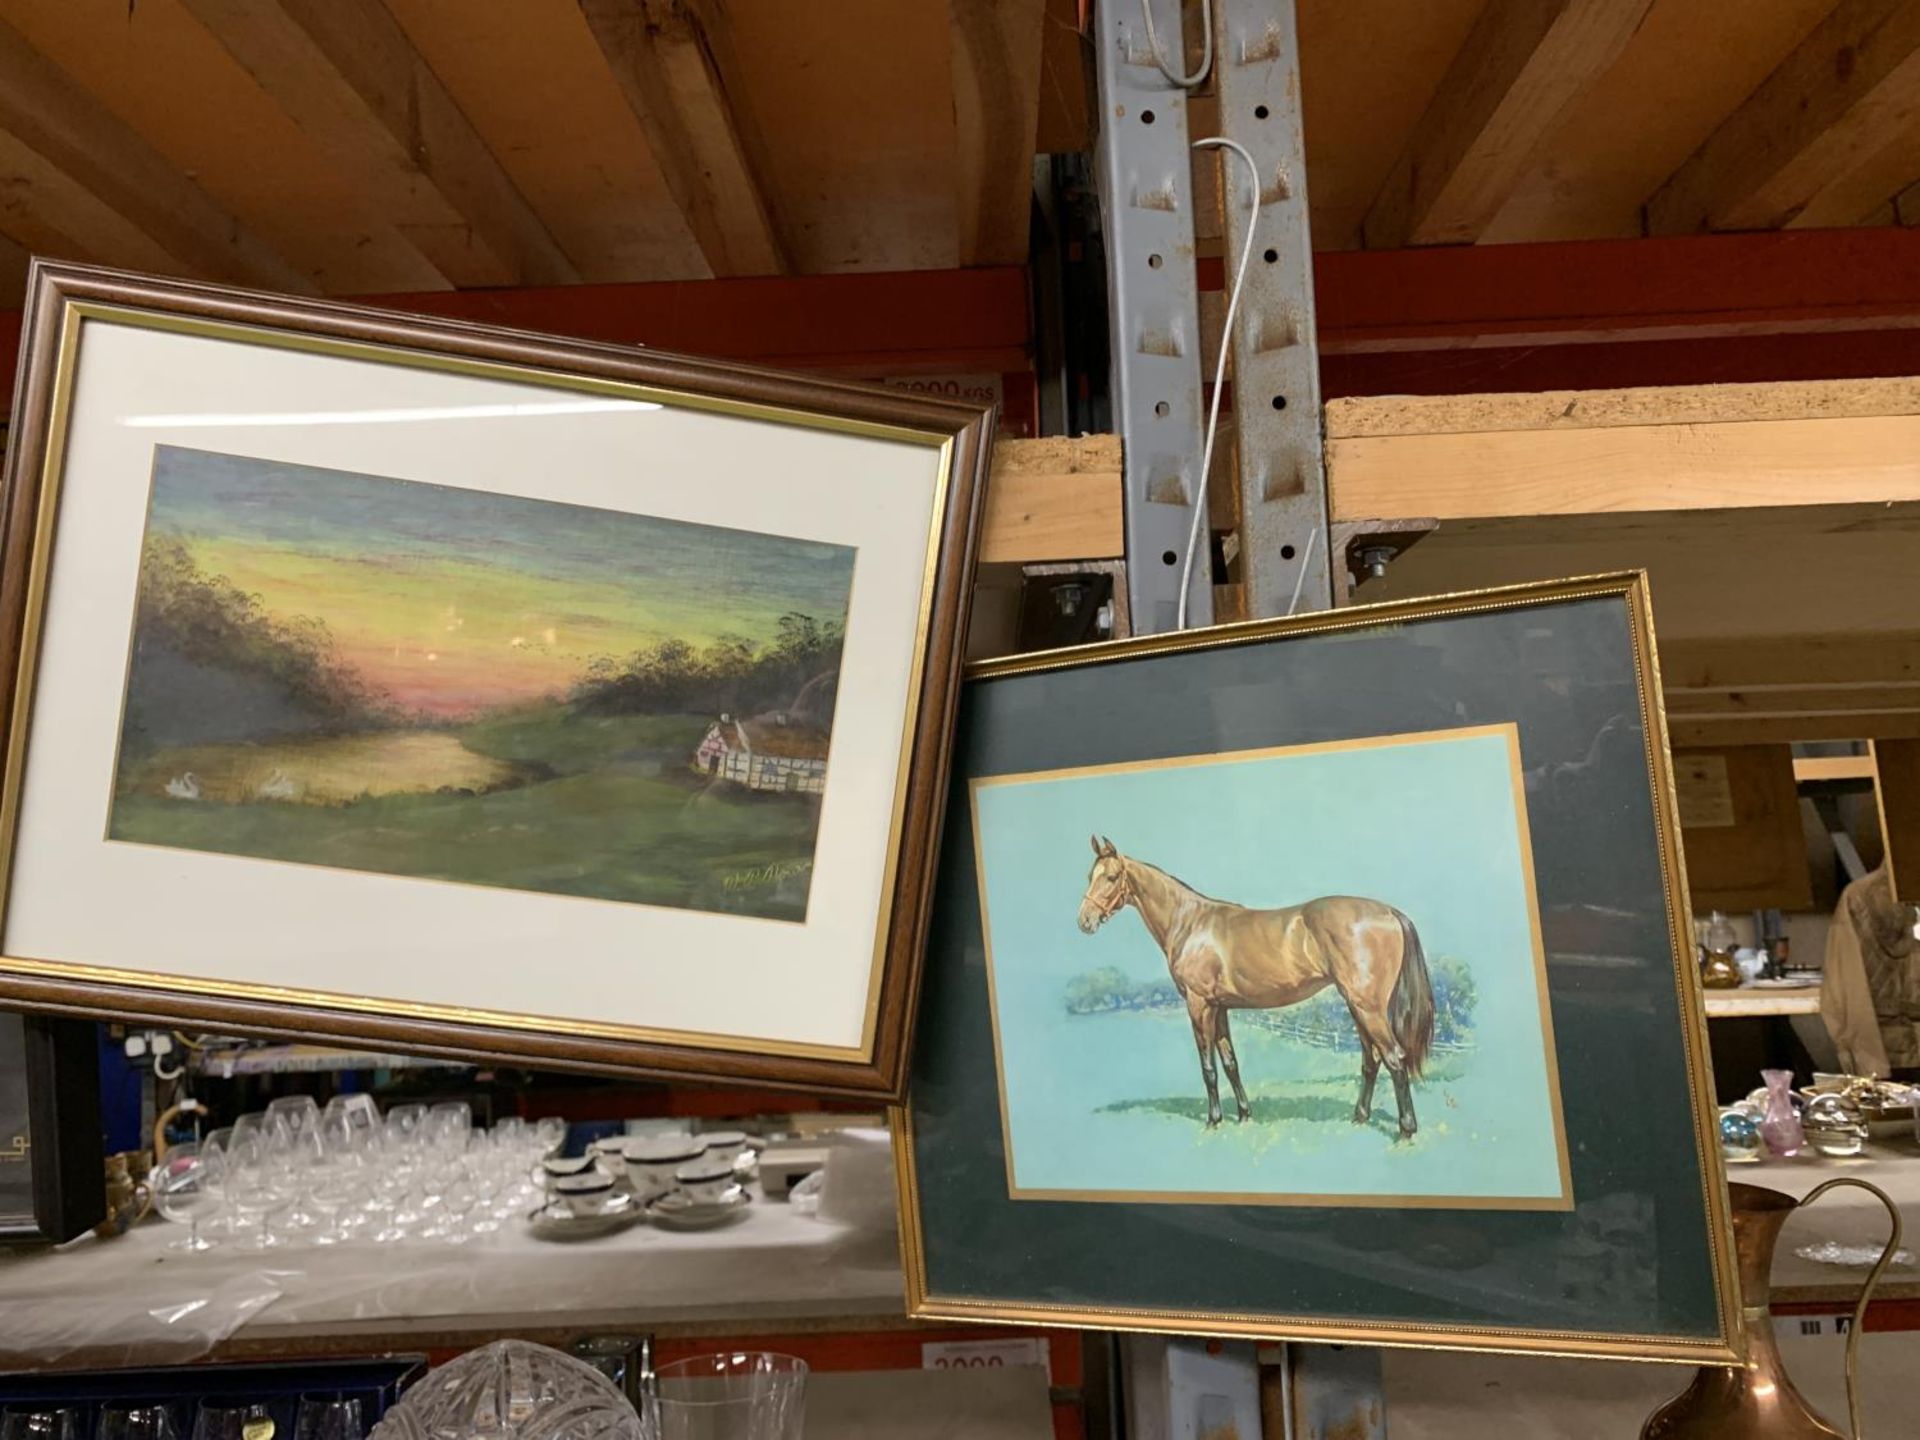 A PRINT OF A RACEHORSE PLUS A PAINTING OF A COTTAGE BY A RIVER AT SUNSET